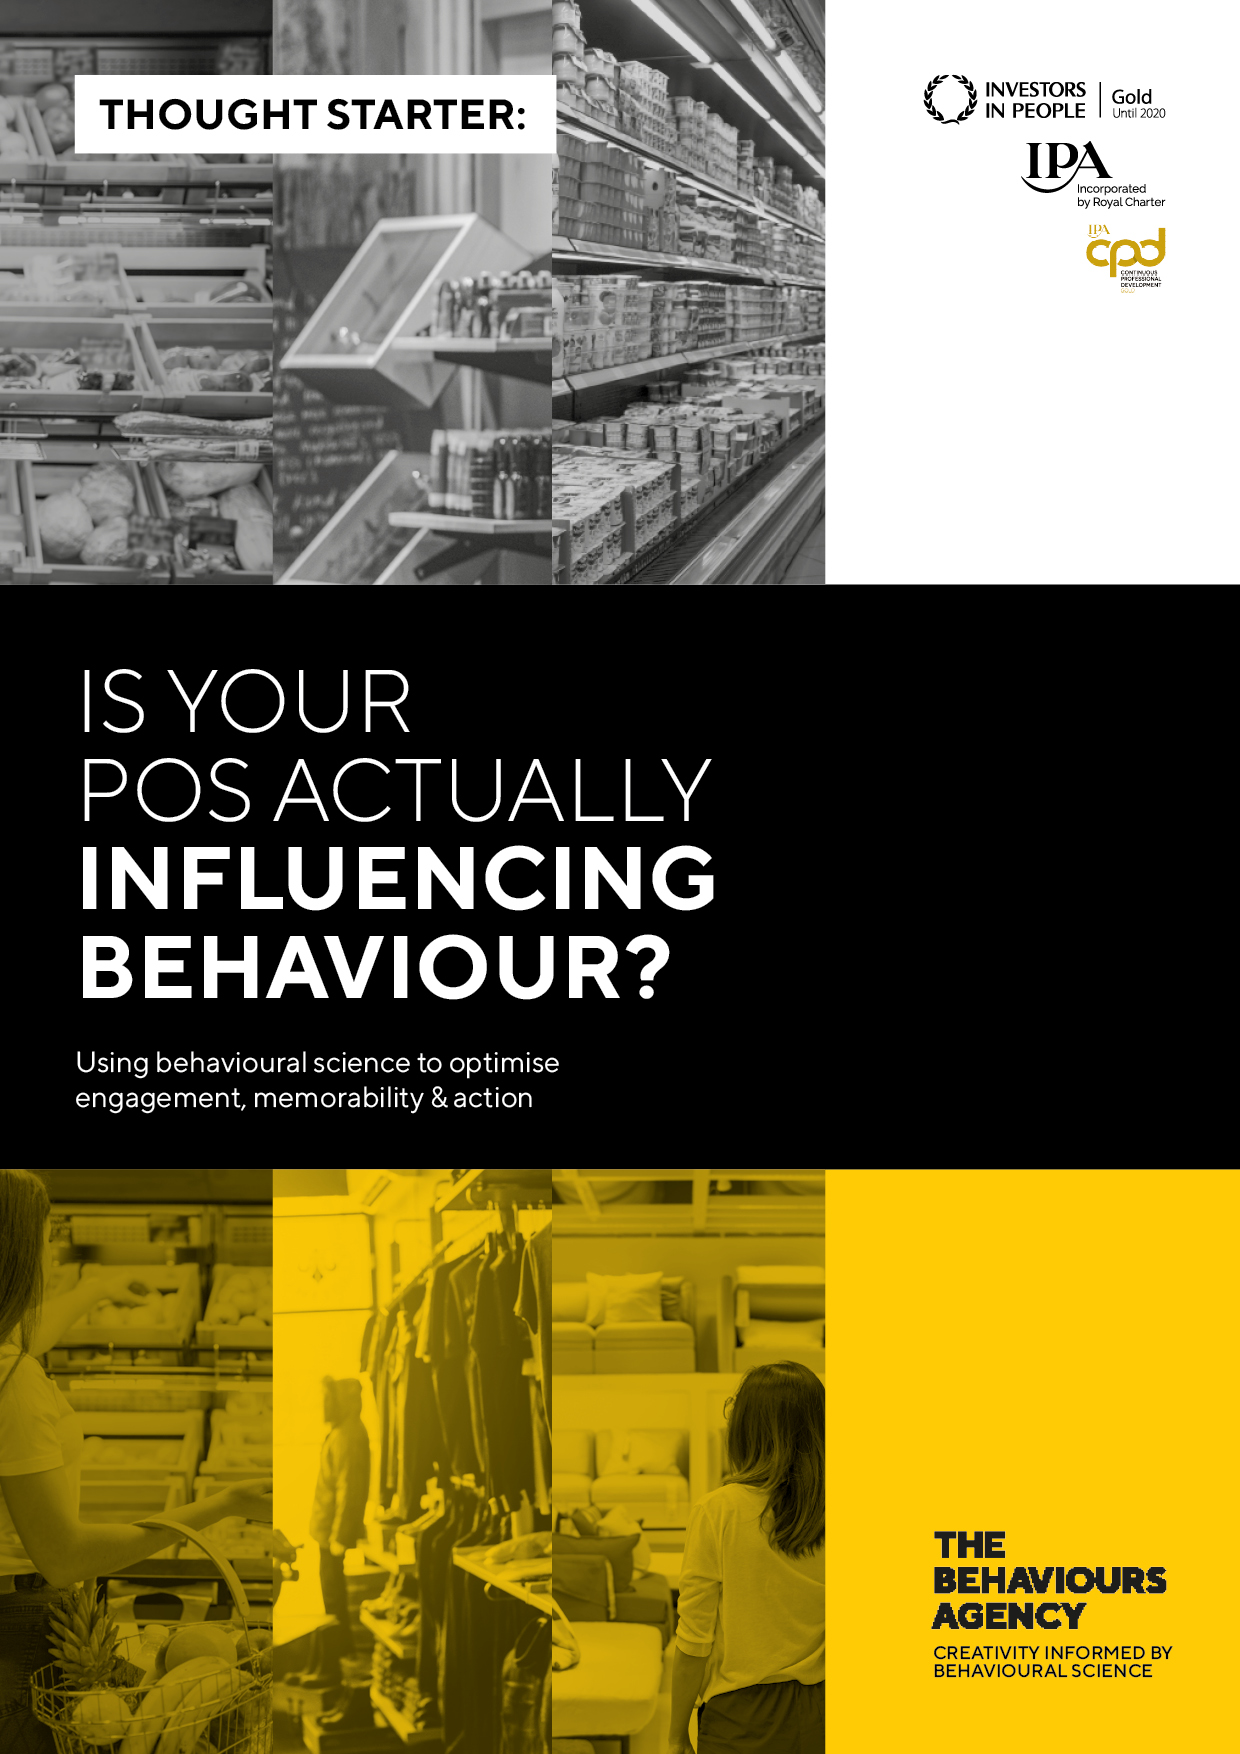 Is your POS actually influencing behaviour?